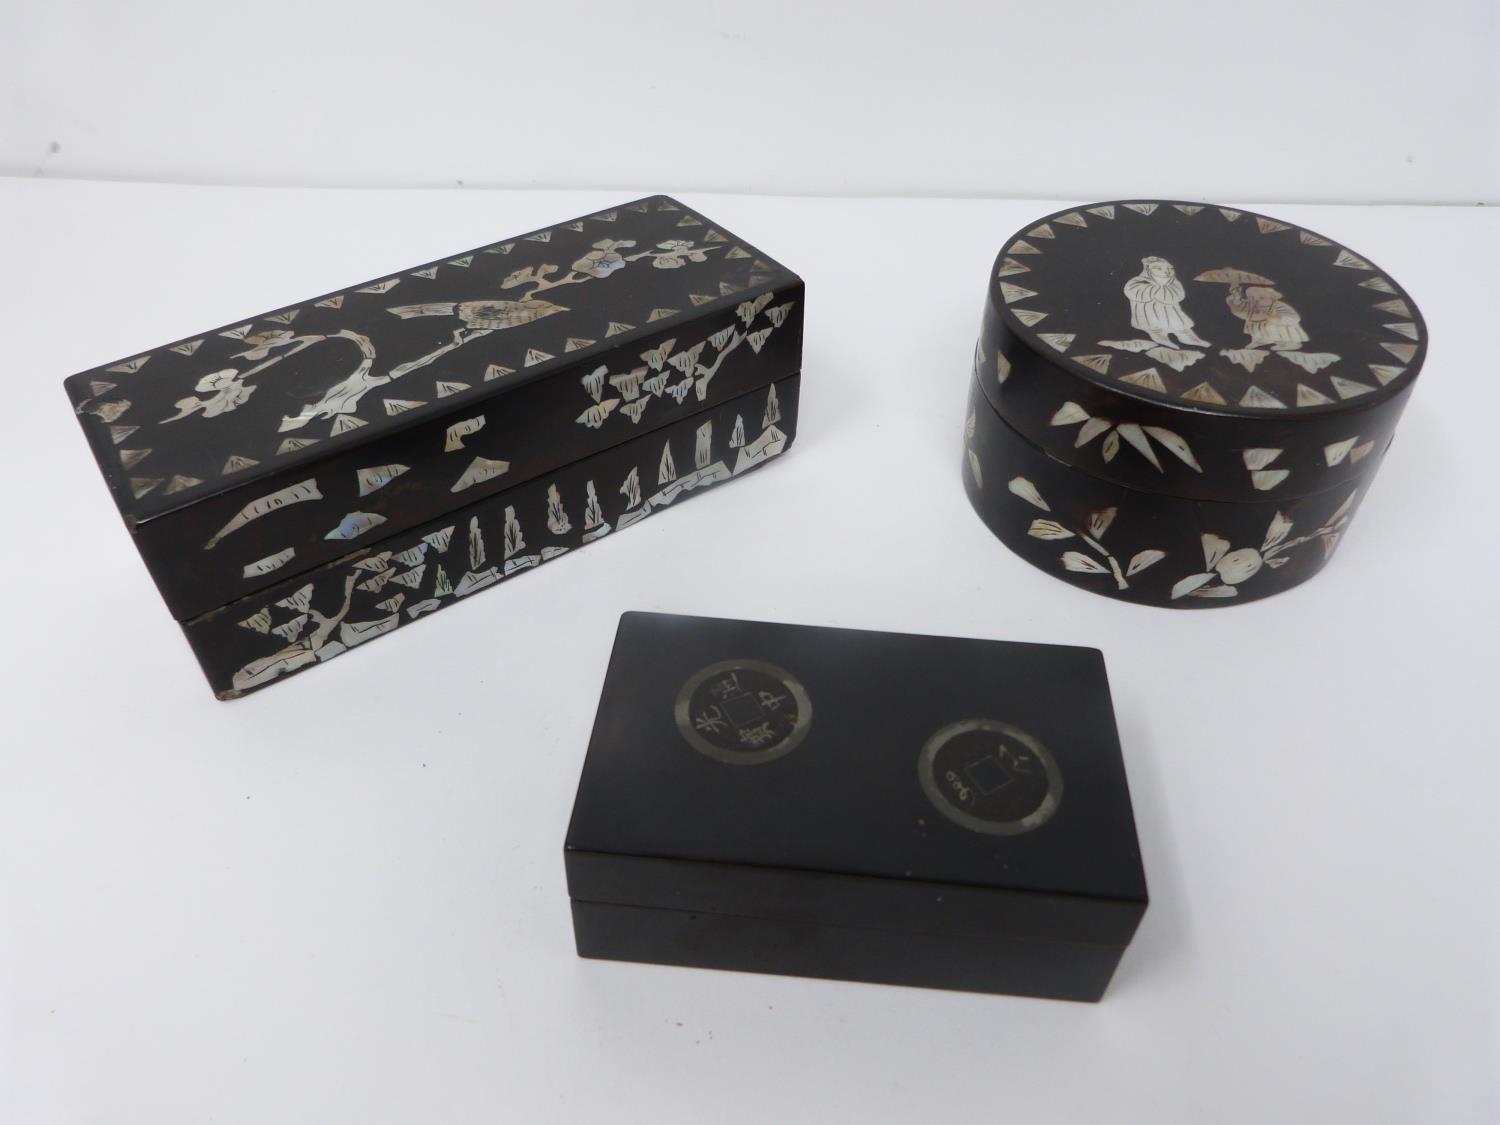 Three Chinese lacquered boxes. Two rectangular in shape the other circular, one rectangular and